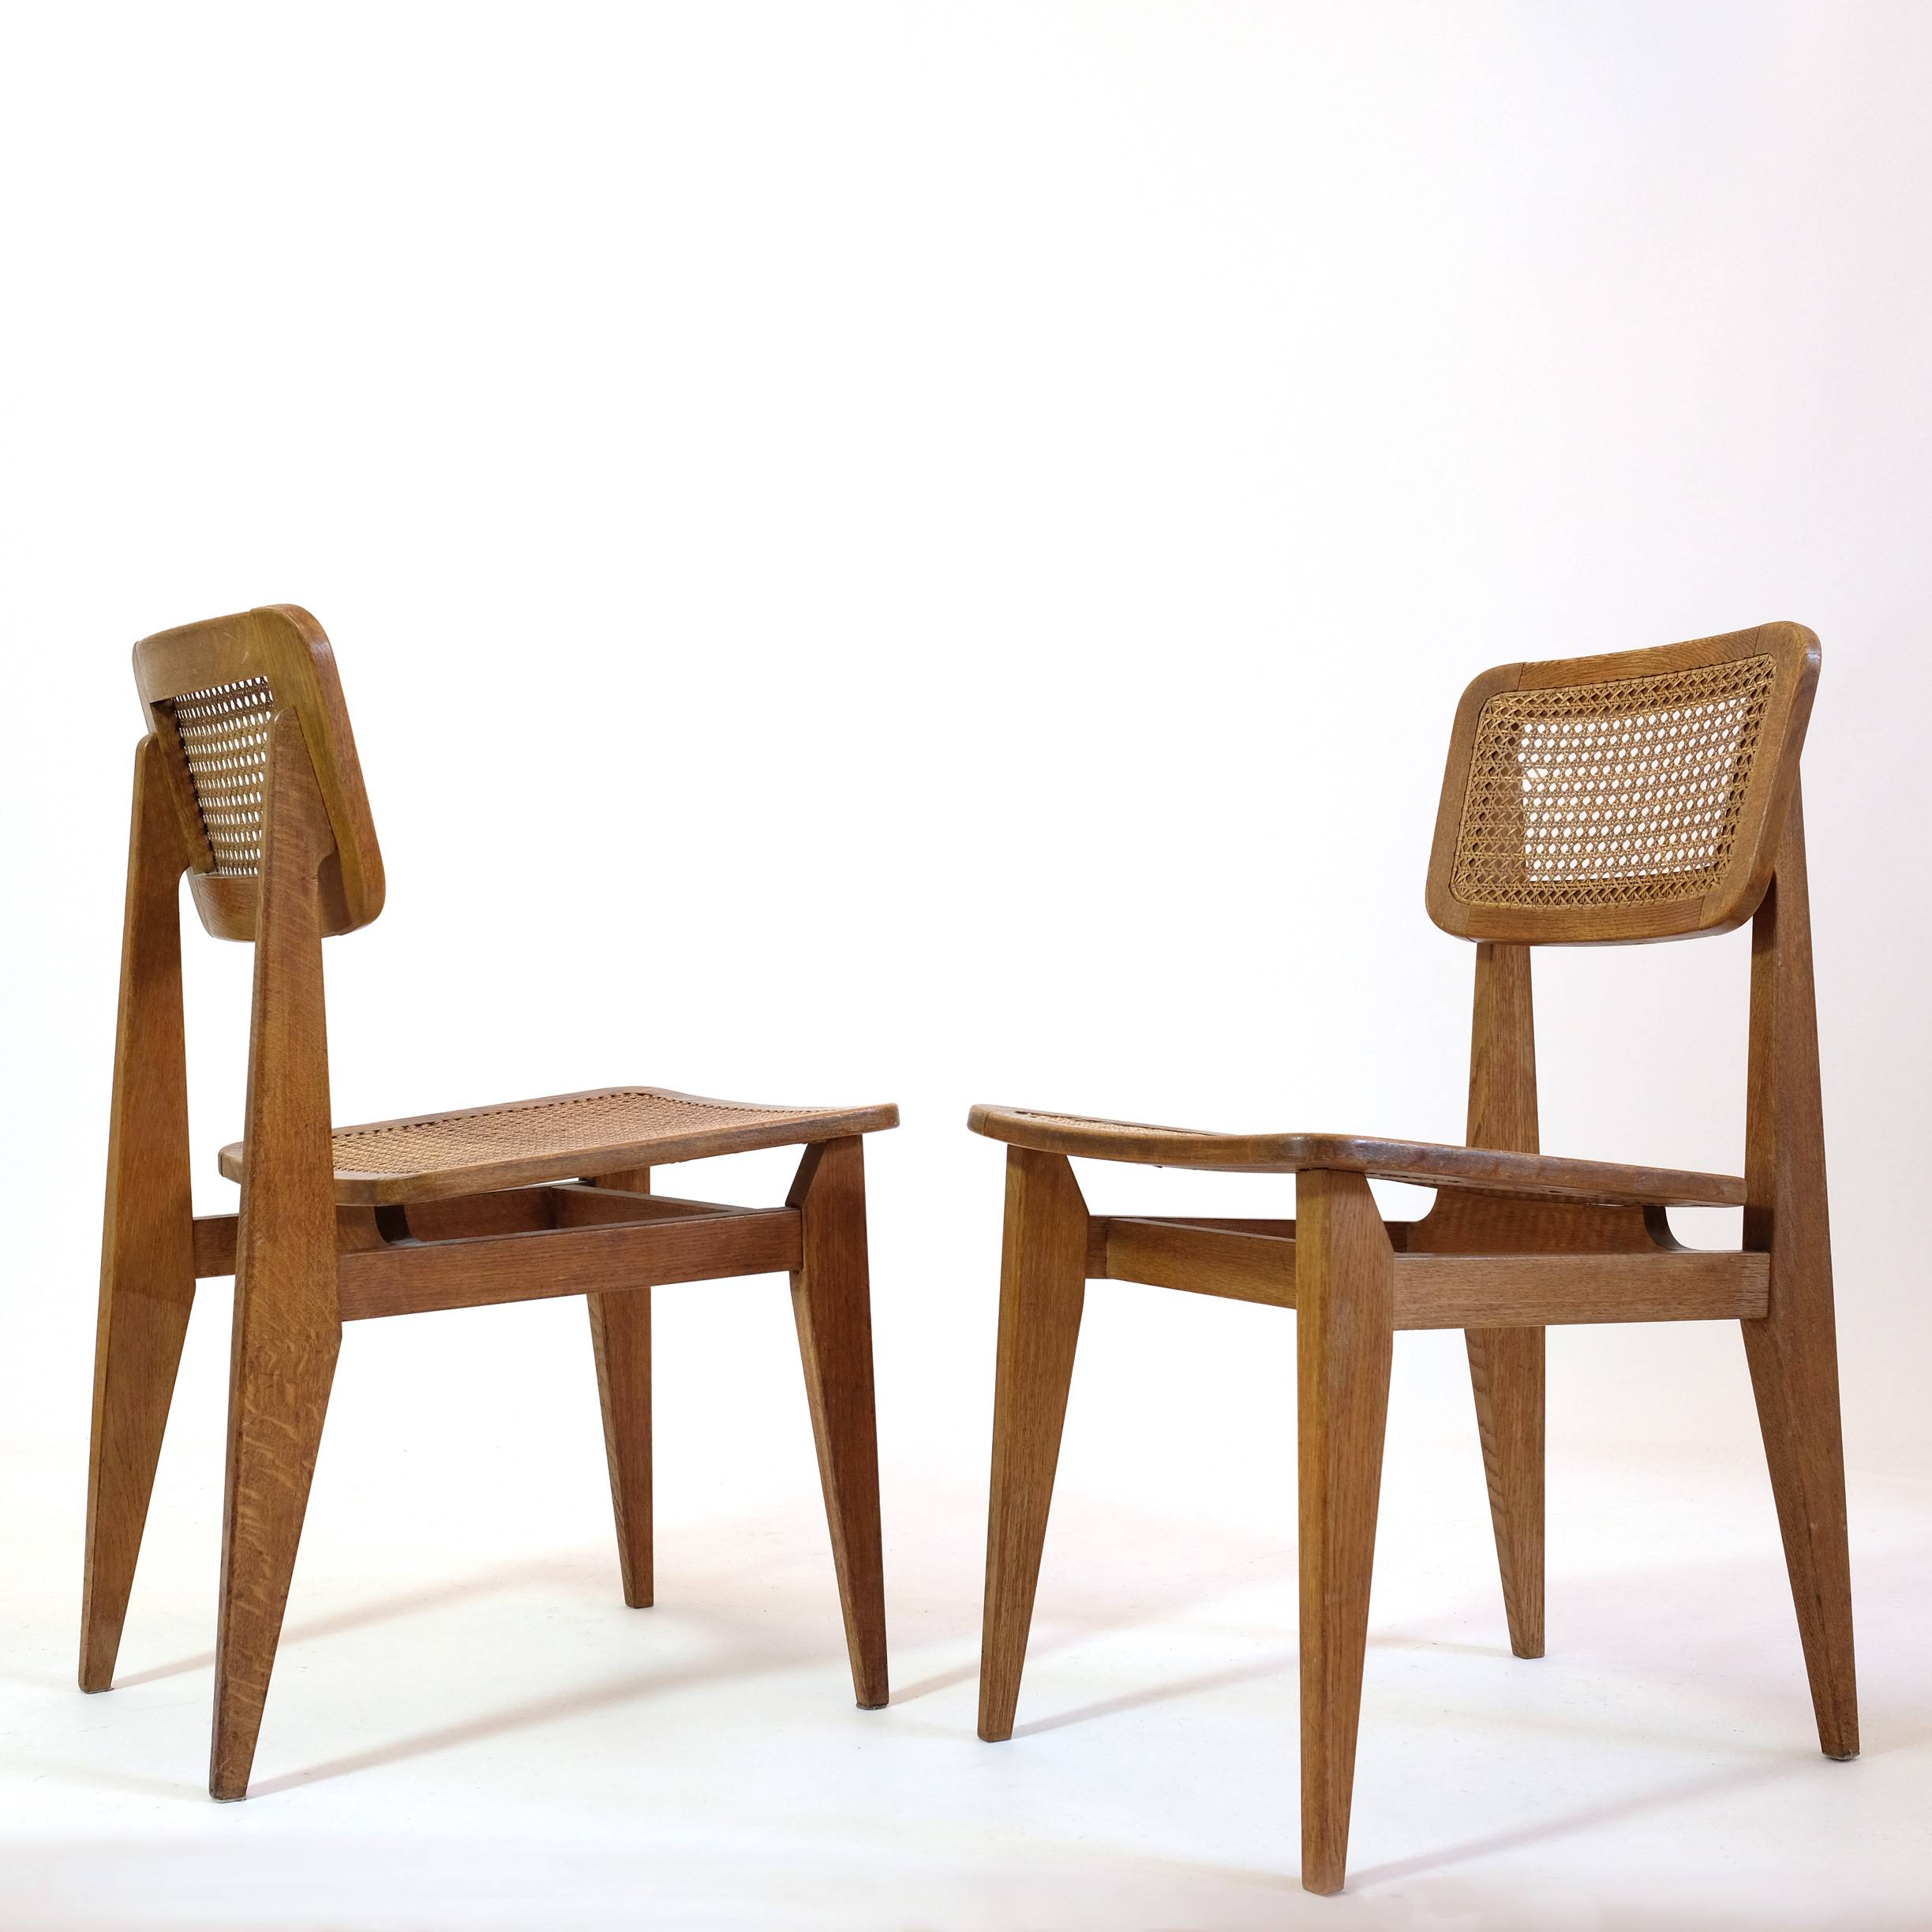 Marcel Gascoin, pair of C cane chairs, ARHEC,1950's.